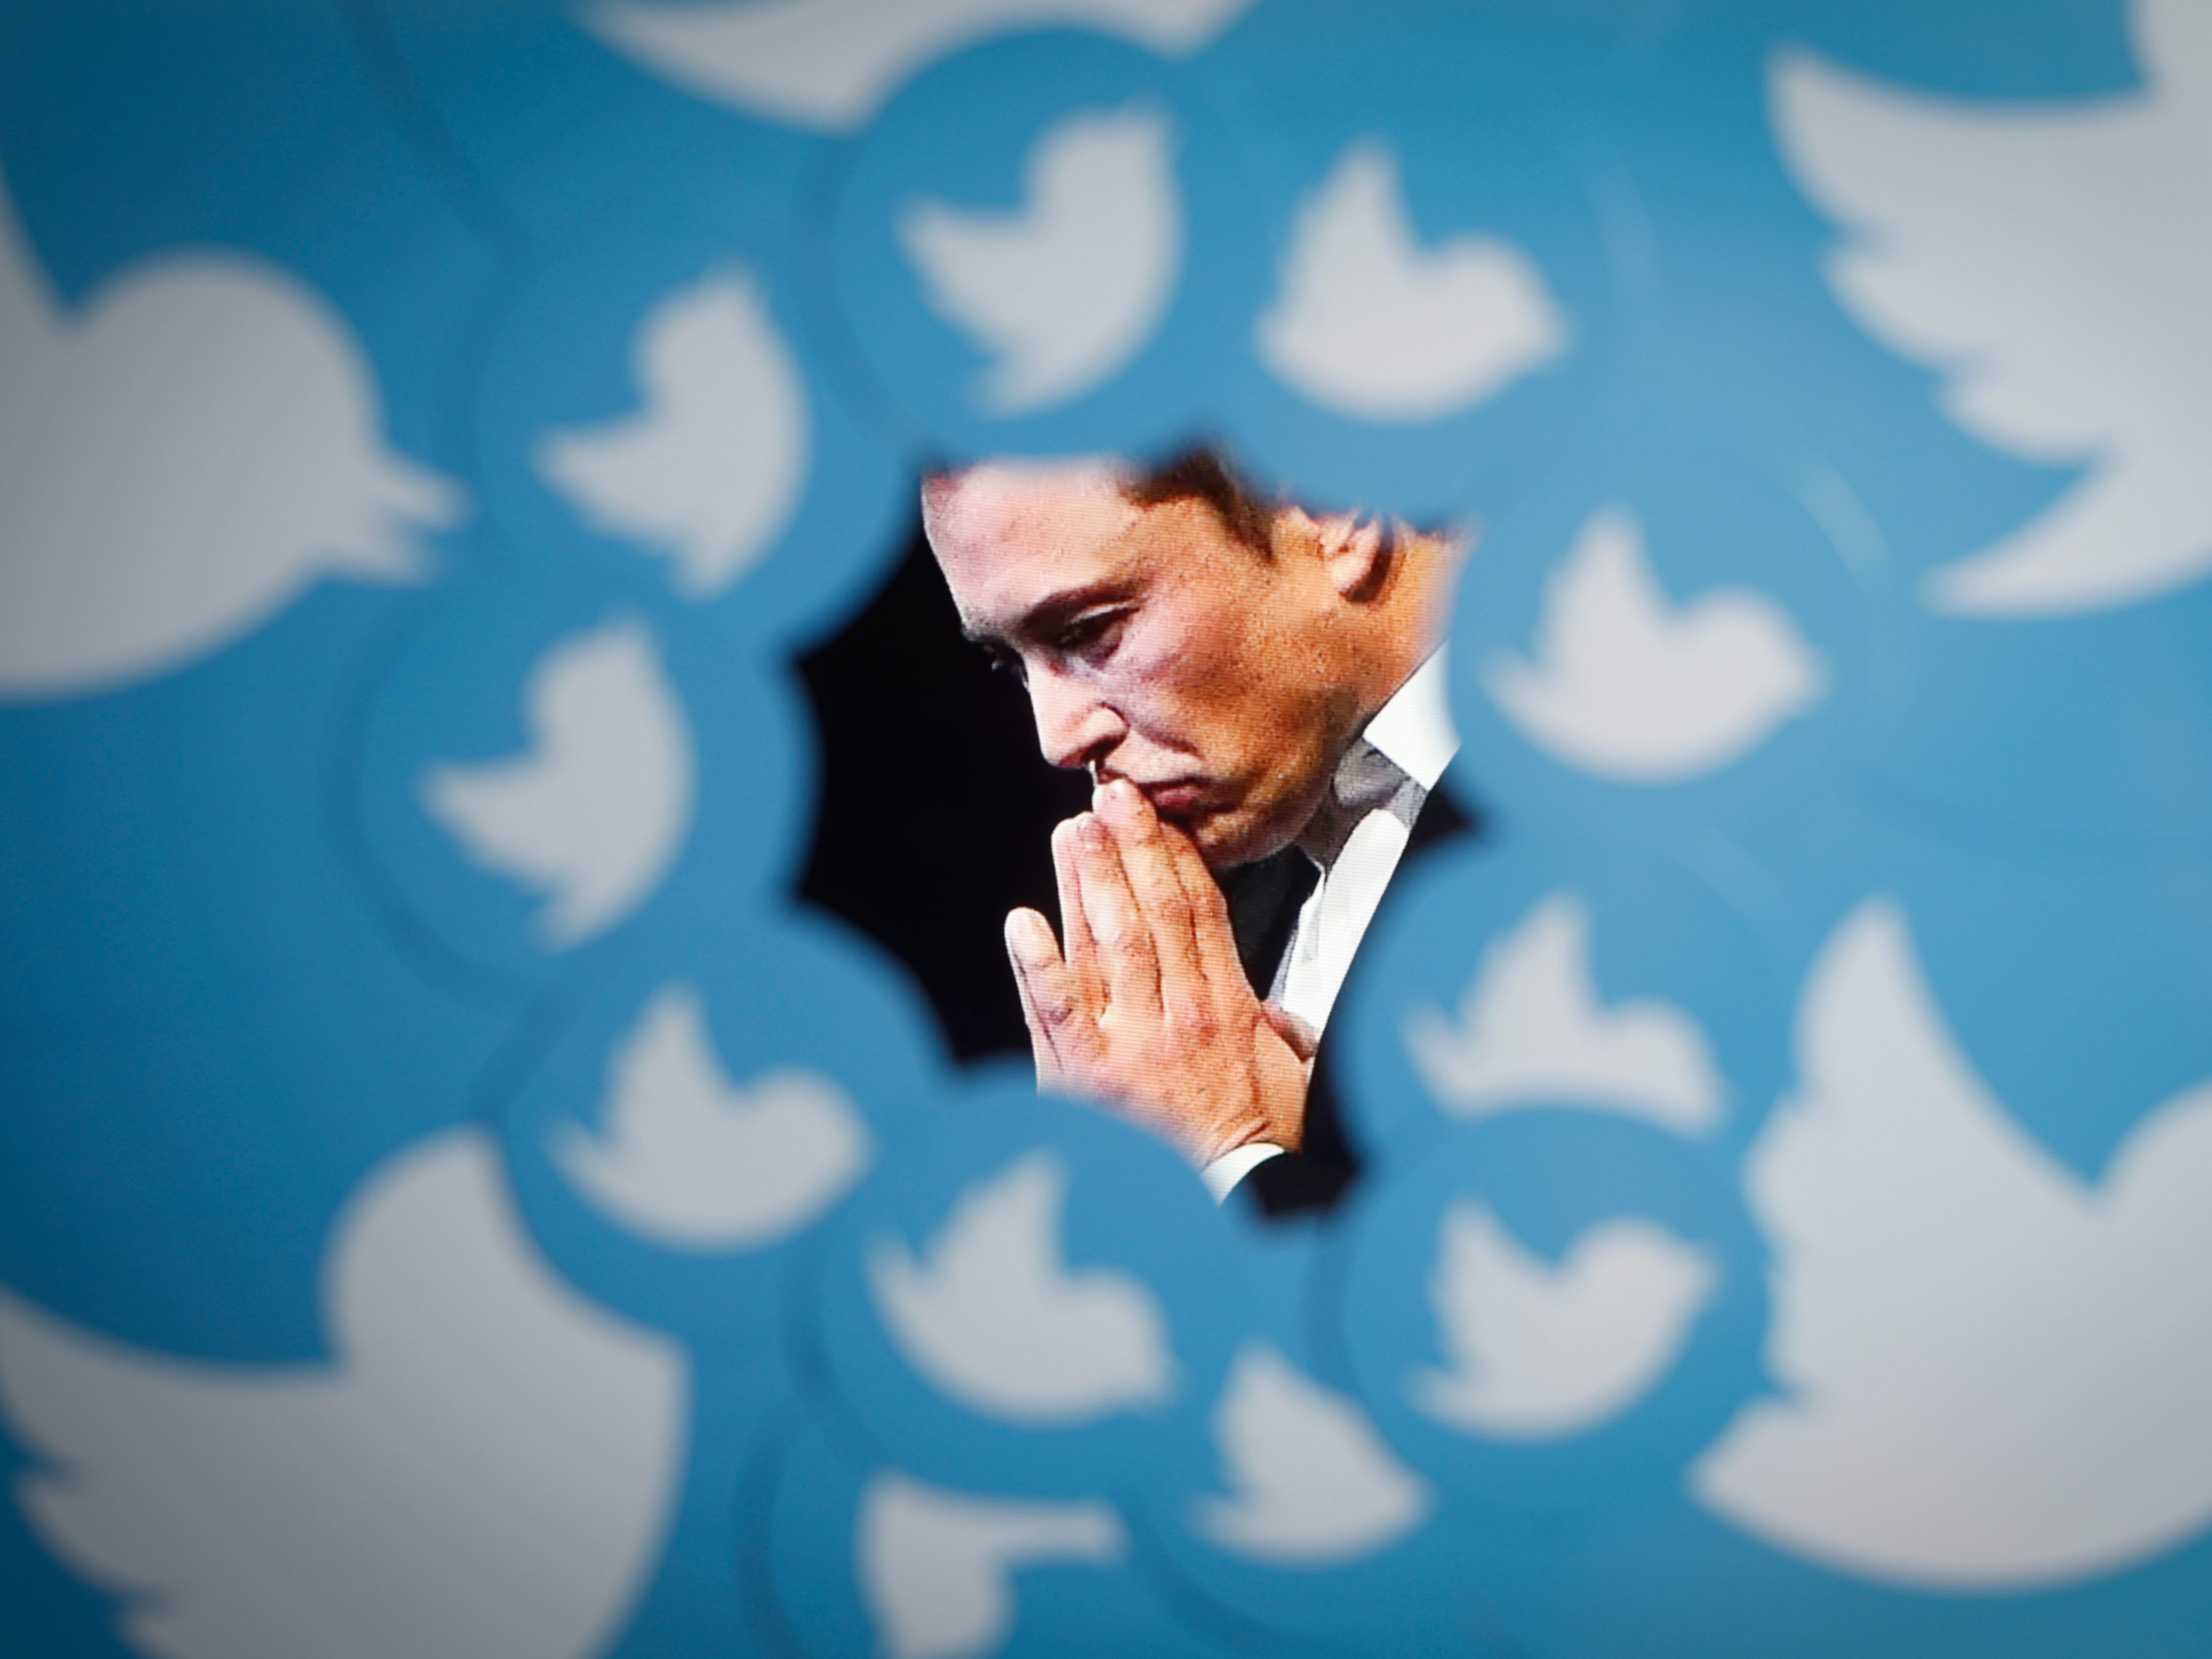 An image of new Twitter owner Elon Musk is seen surrounded by Twitter logos in this photo illustration.